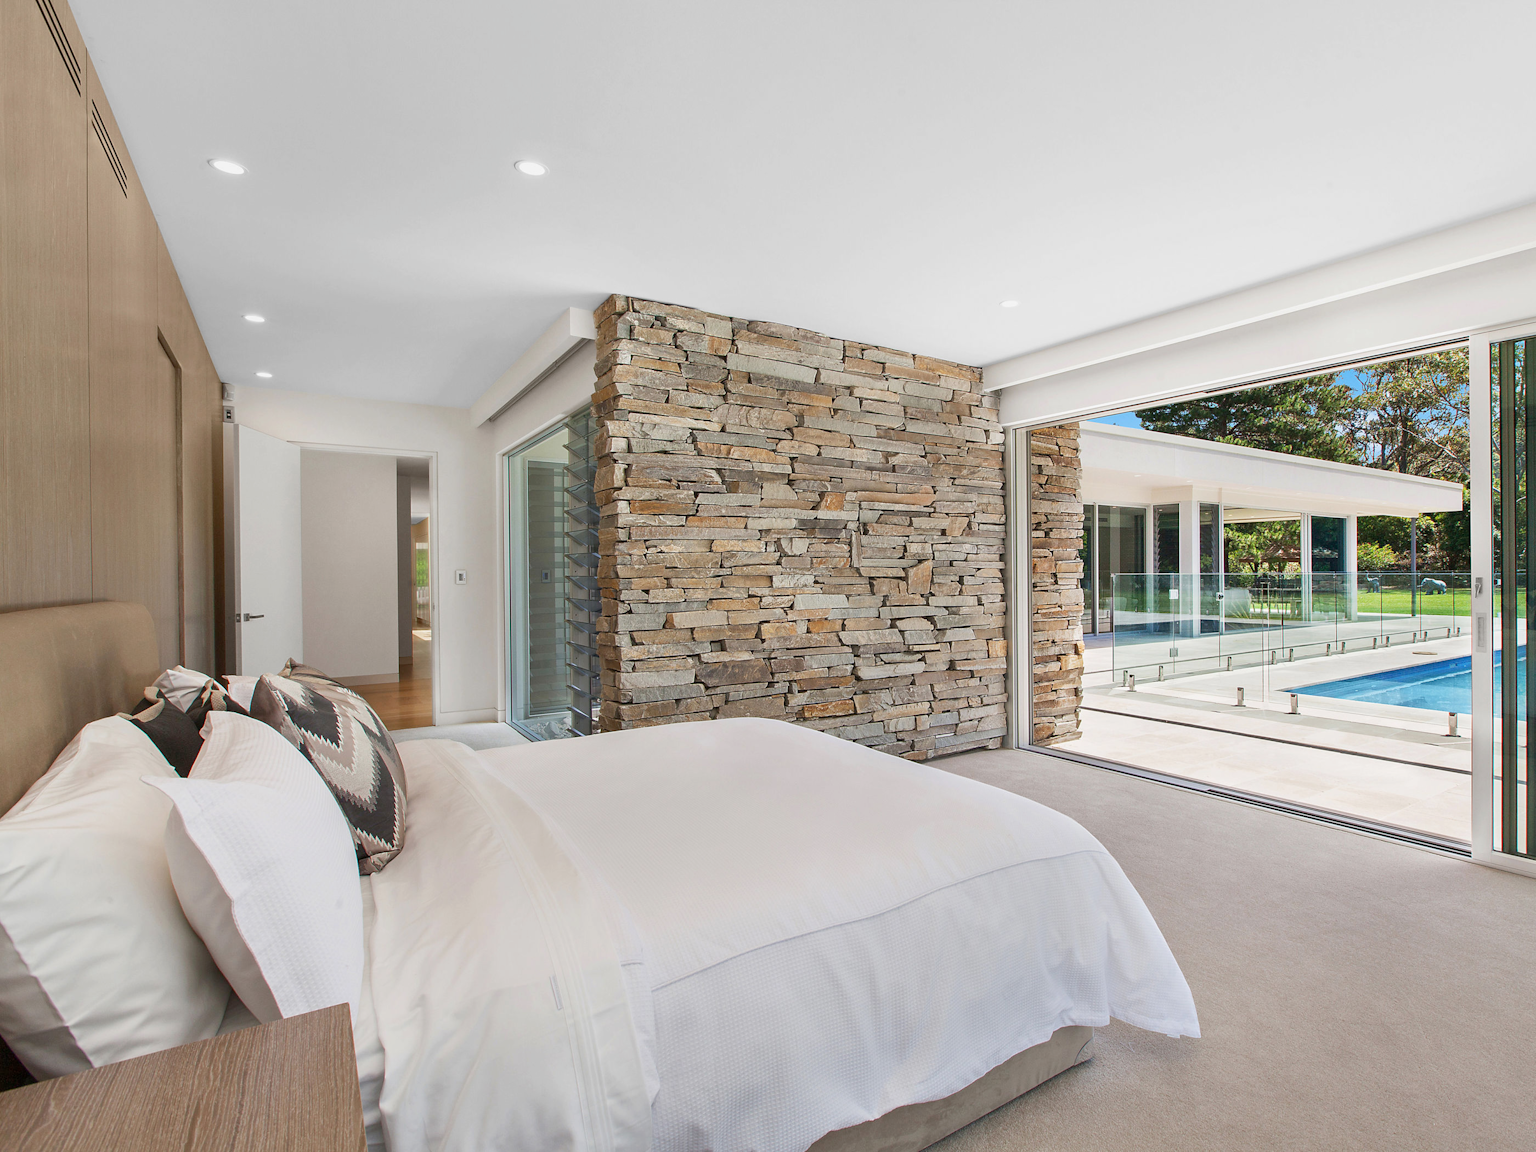 View of master bedroom with Baw Baw dry stone feature wall projecting out toward pool area